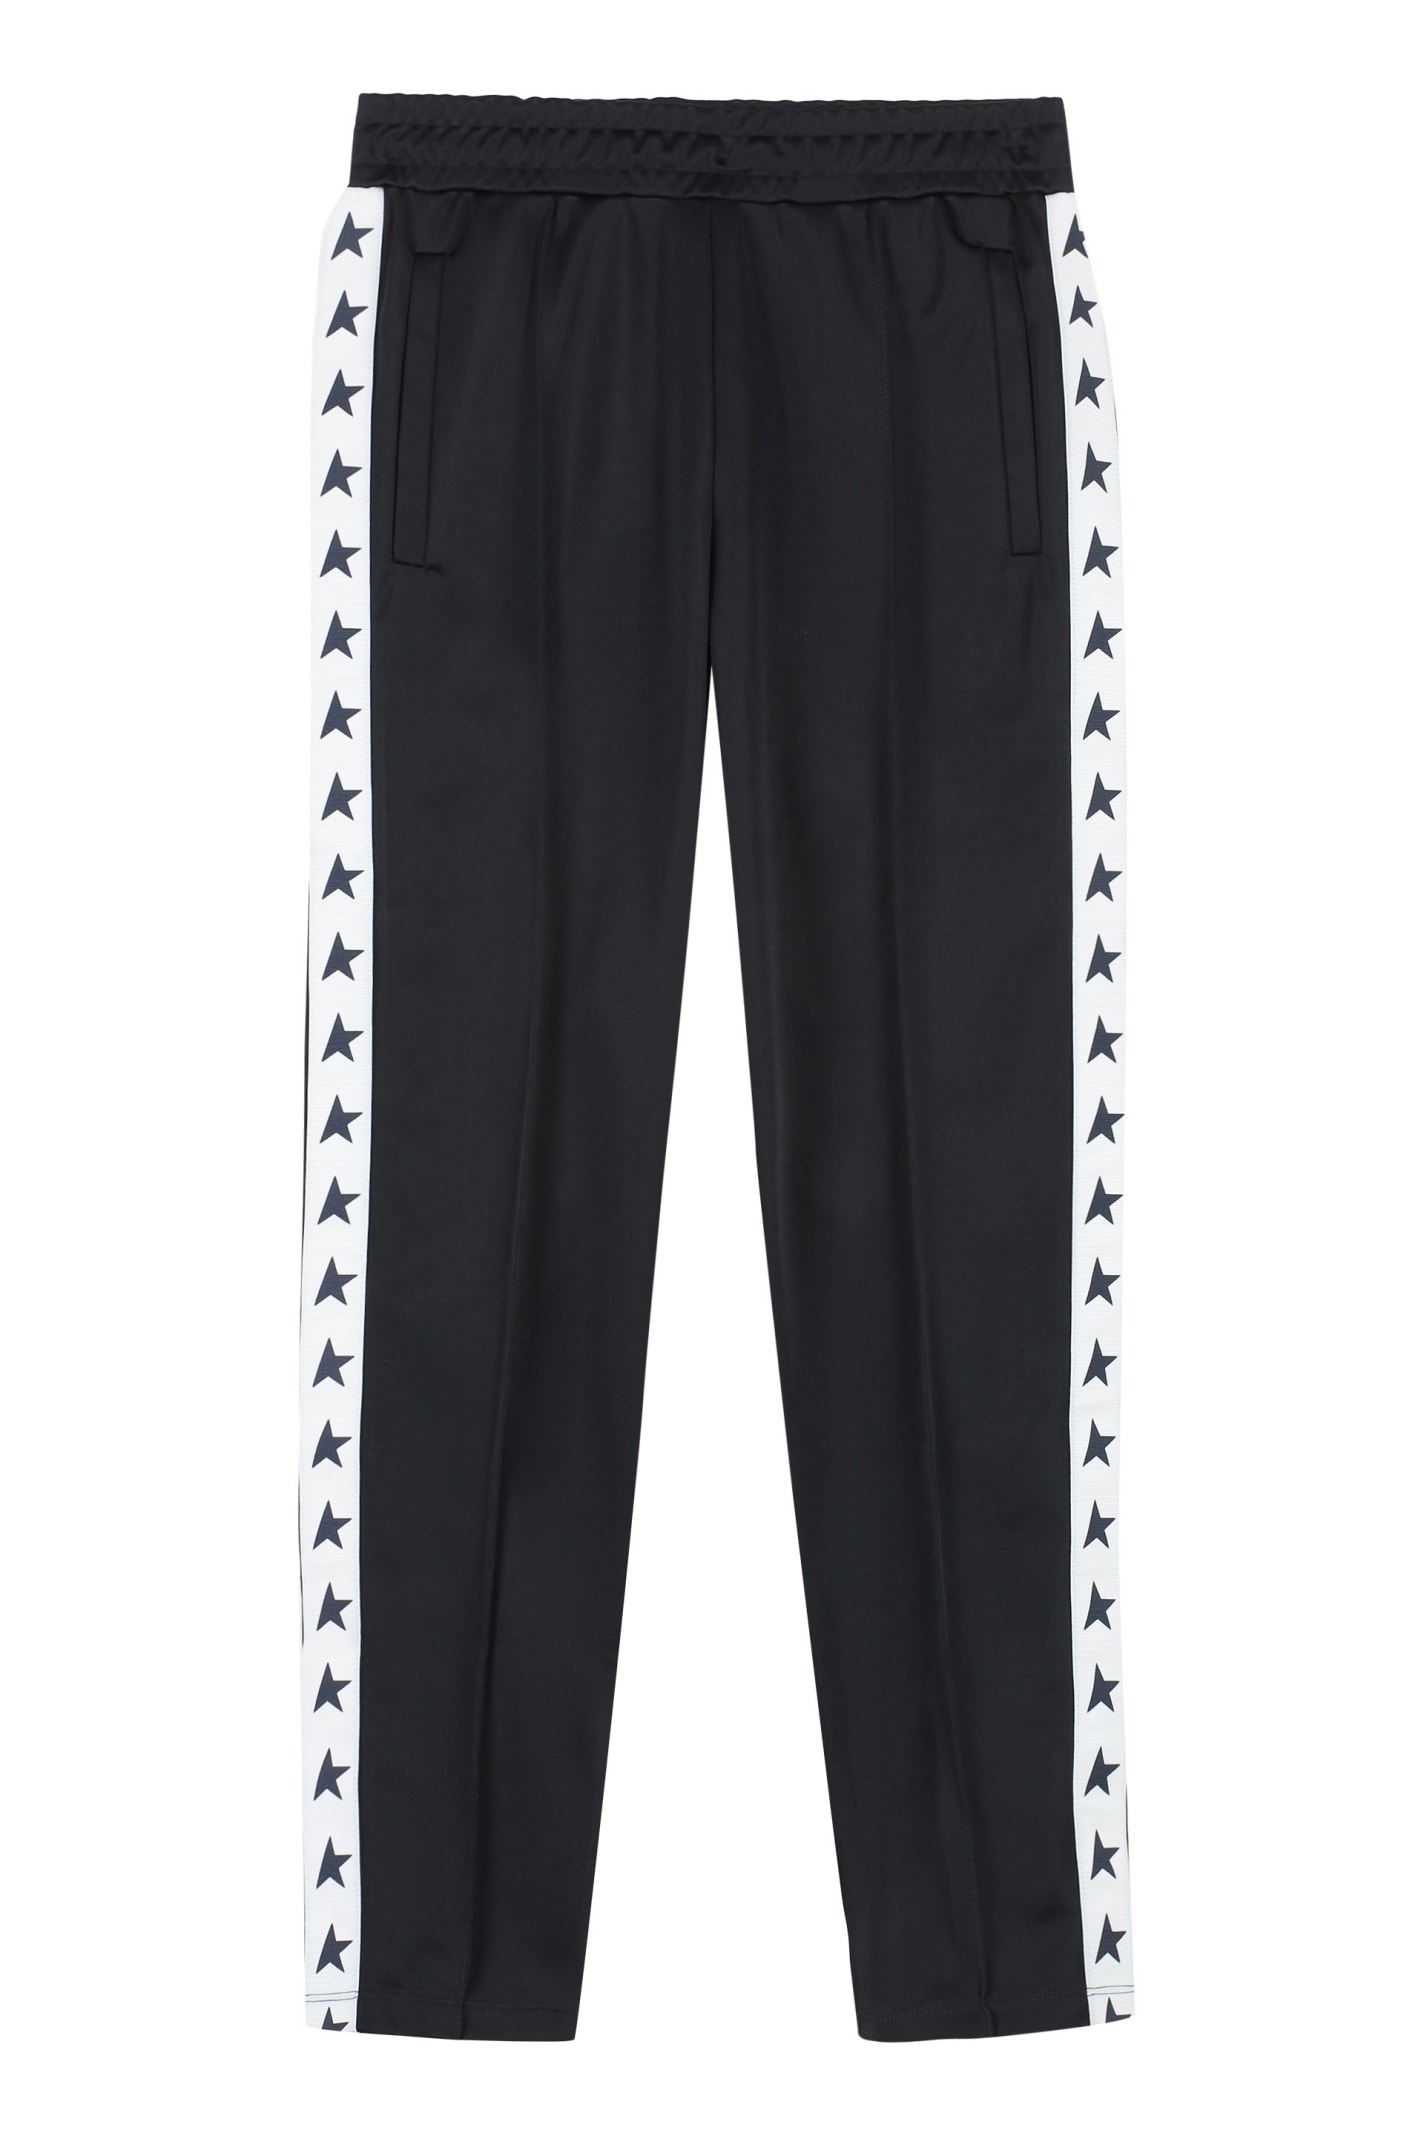 Golden Goose Track-pants With Contrasting Side Stripes